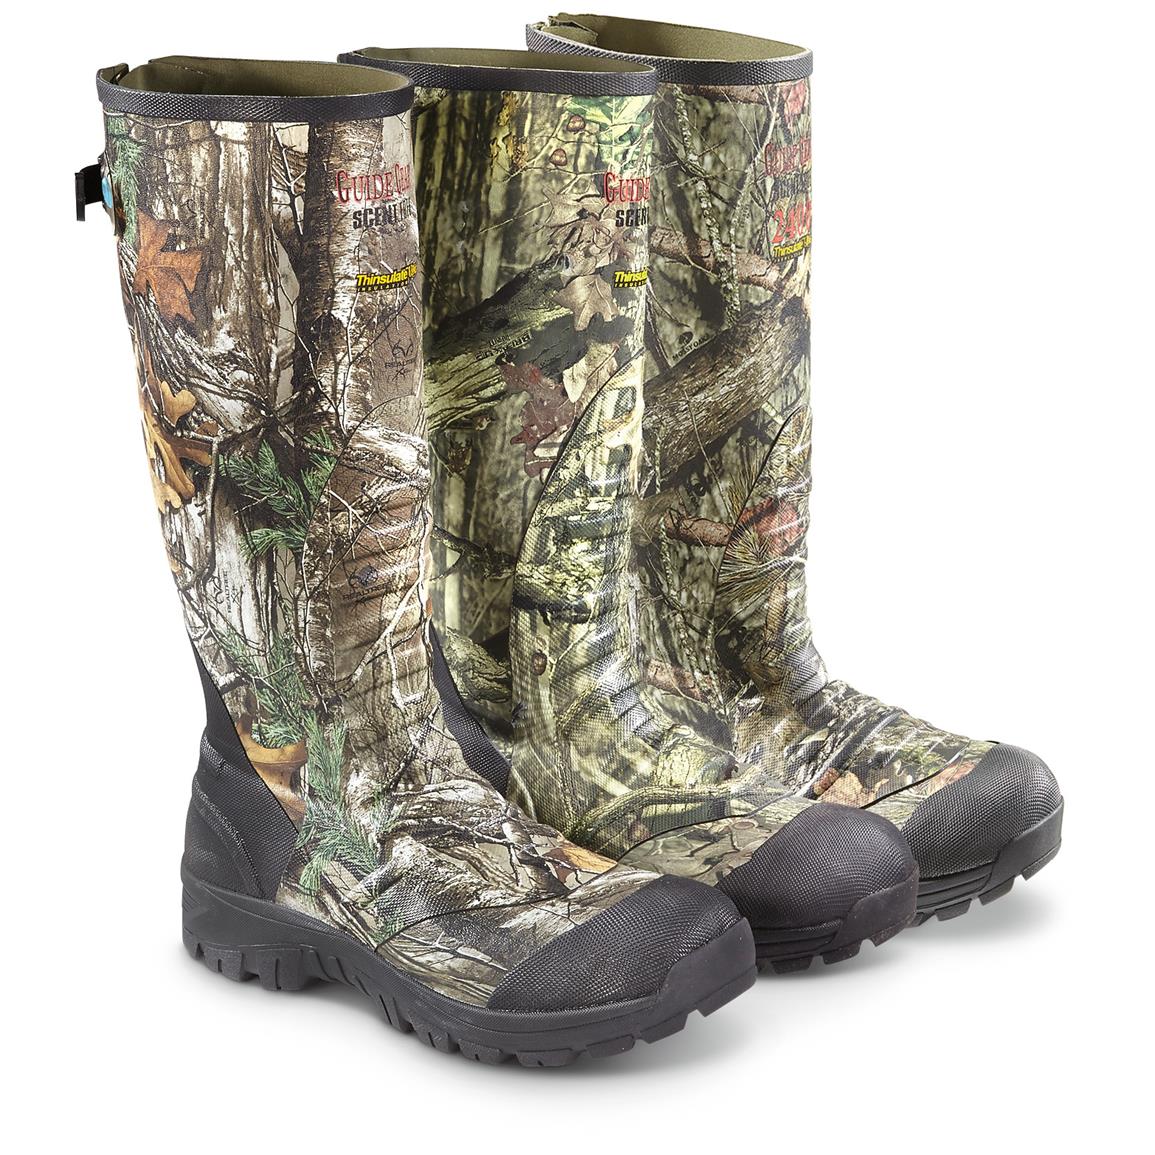 Guide Gear Men's 17" Insulated Rubber Hunting Boots, 2,400